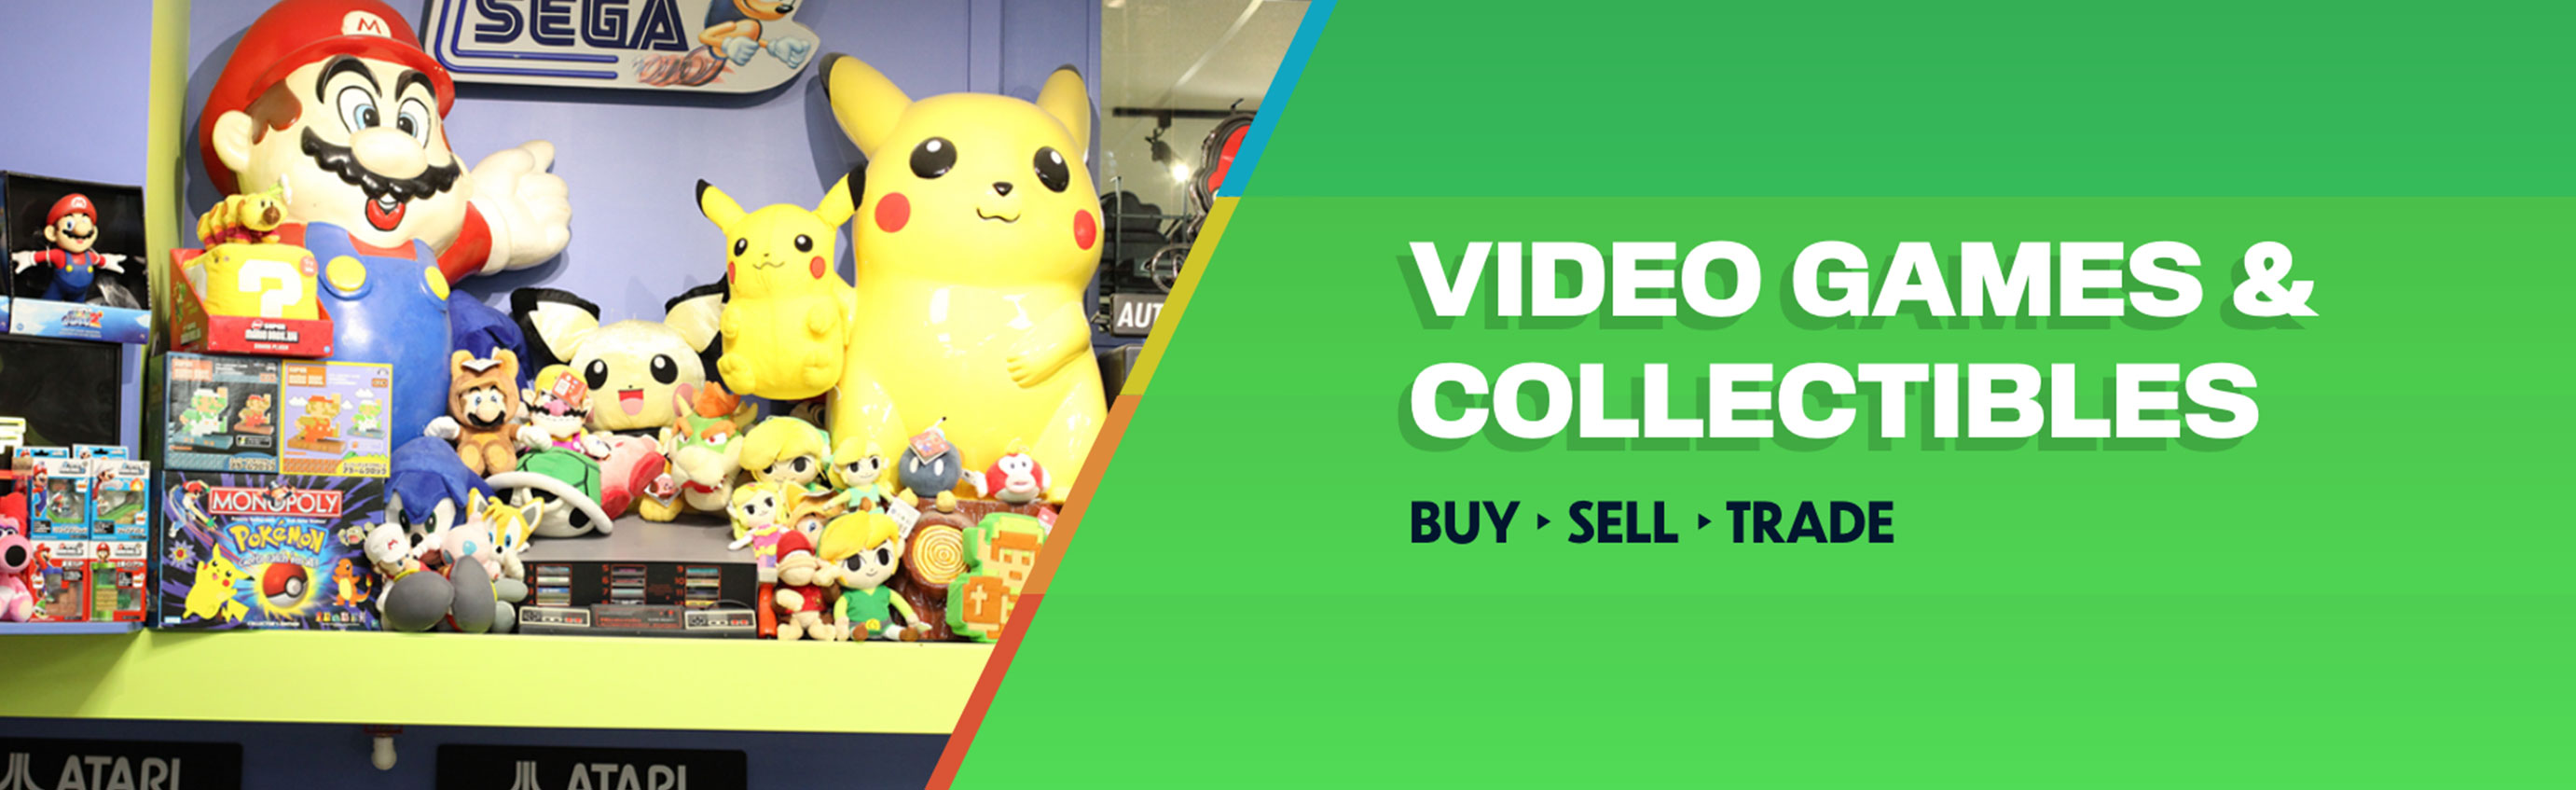 closest video game store near me